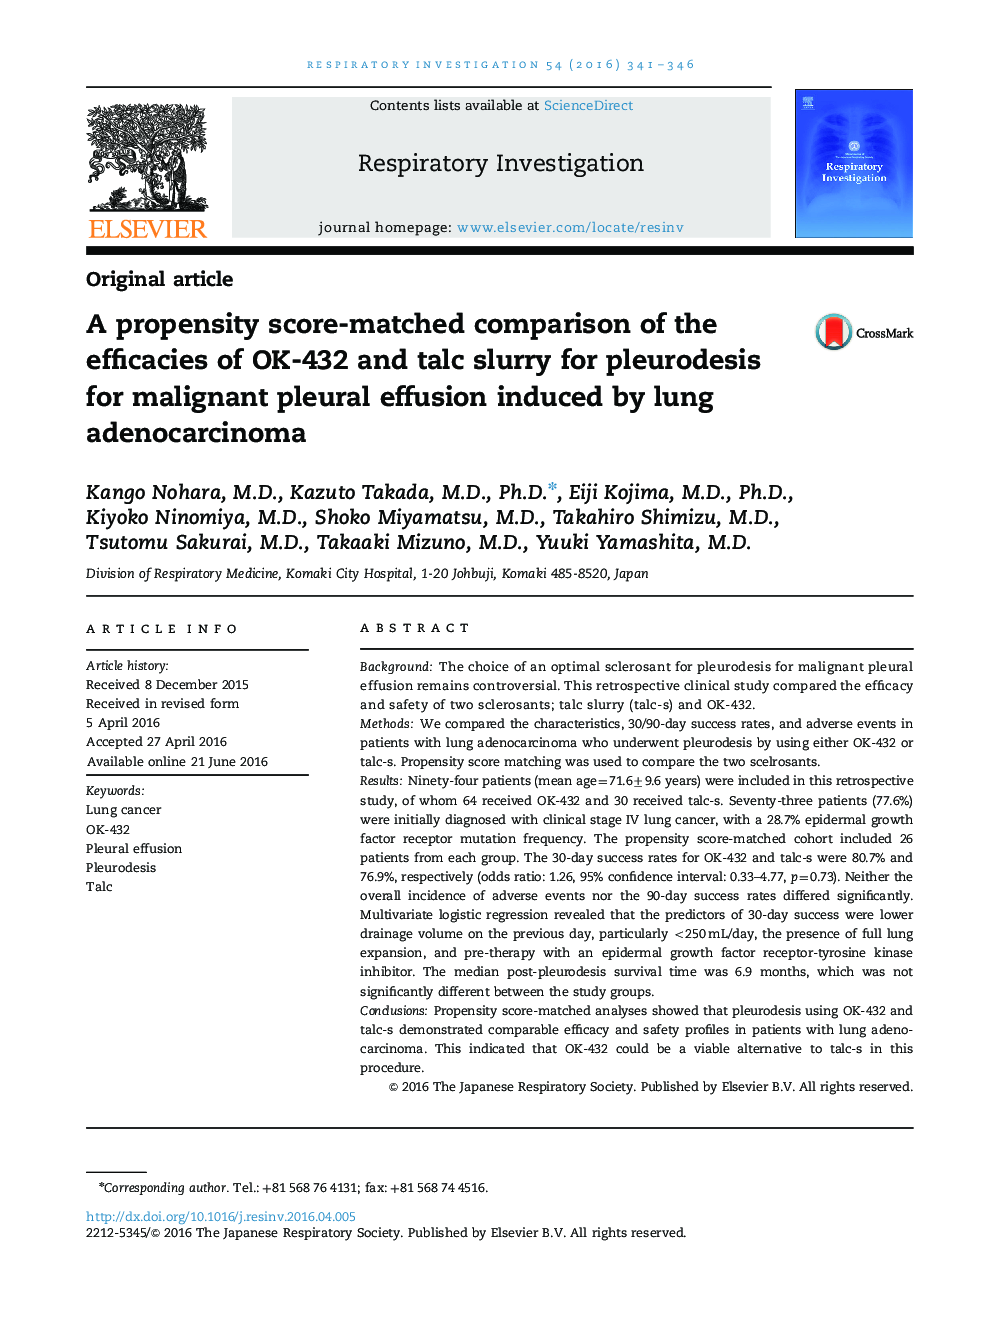 A propensity score-matched comparison of the efficacies of OK-432 and talc slurry for pleurodesis for malignant pleural effusion induced by lung adenocarcinoma